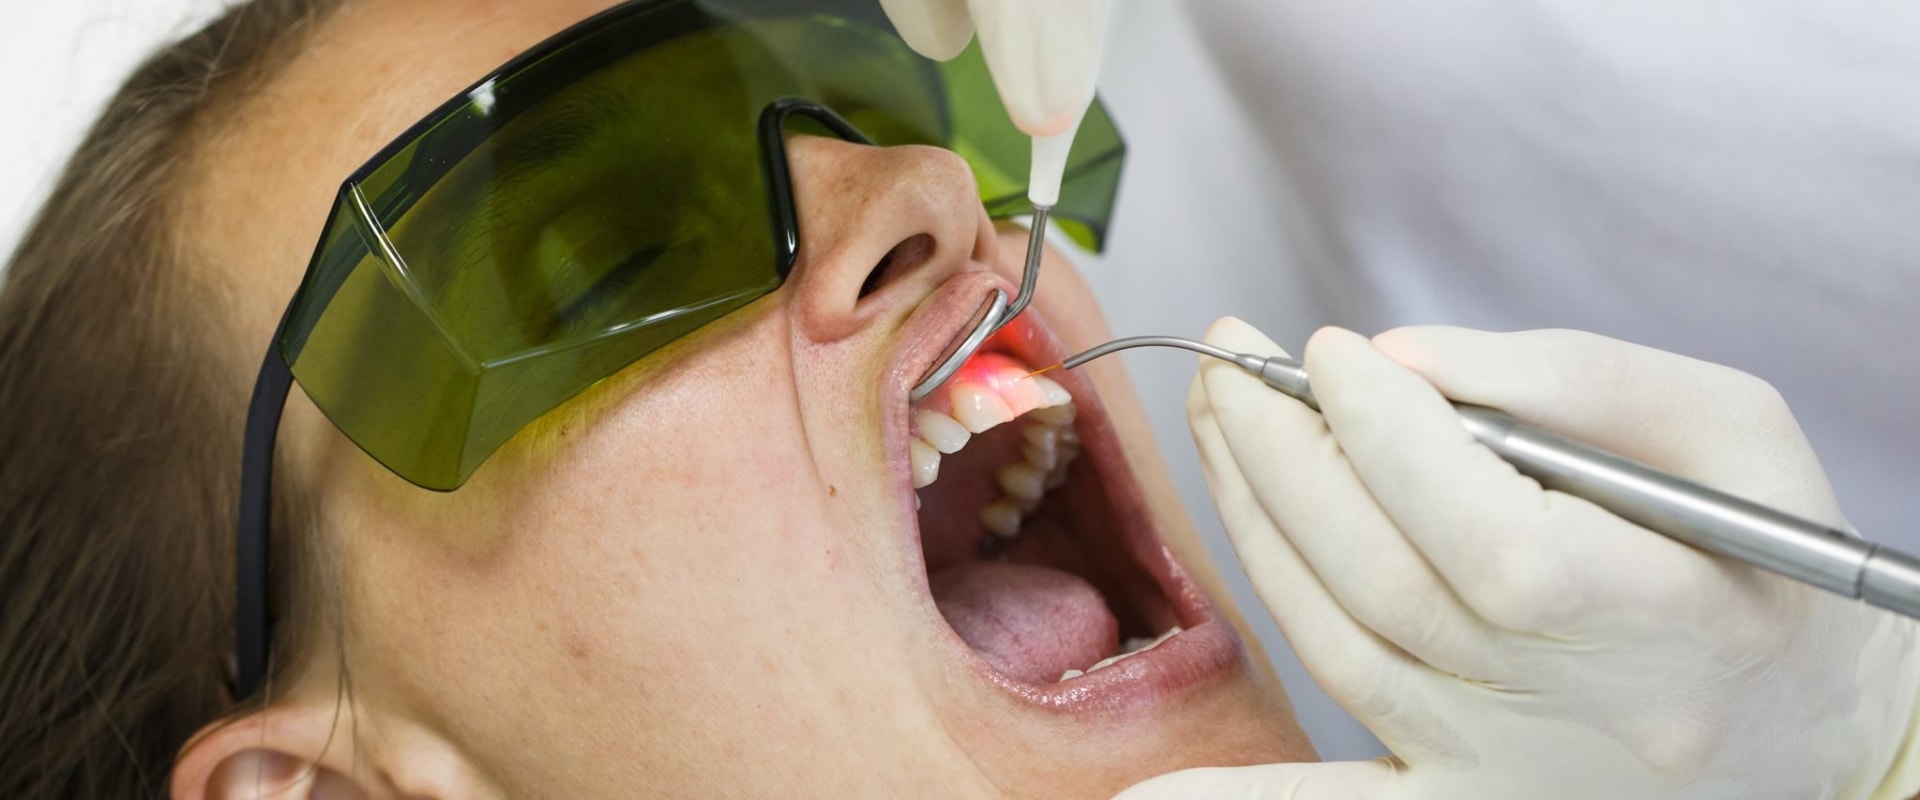 Does laser surgery in the mouth hurt?